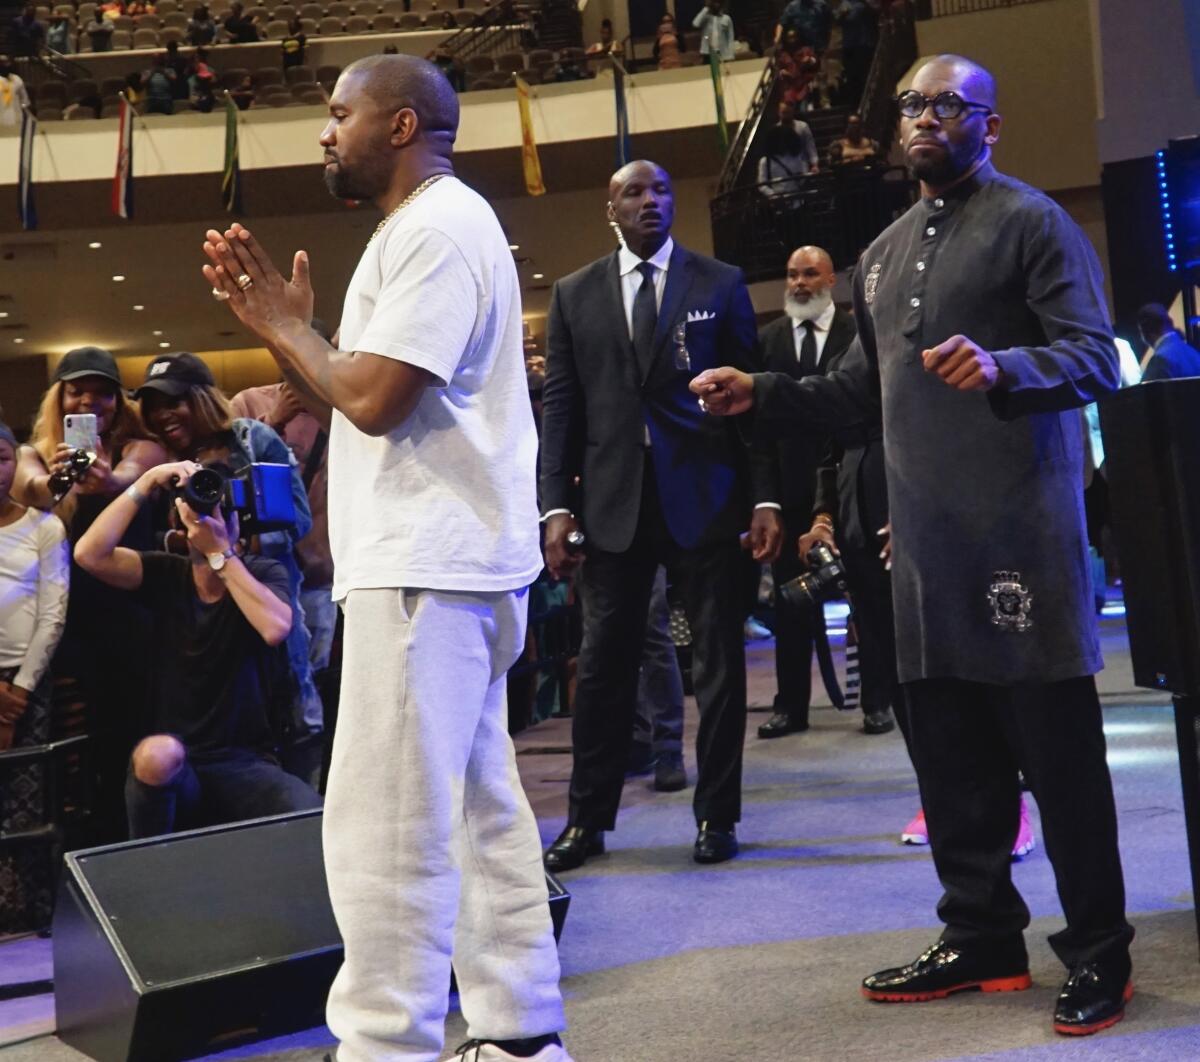 Kanye West clasping his hands in prayer among a crowd of churchgoers